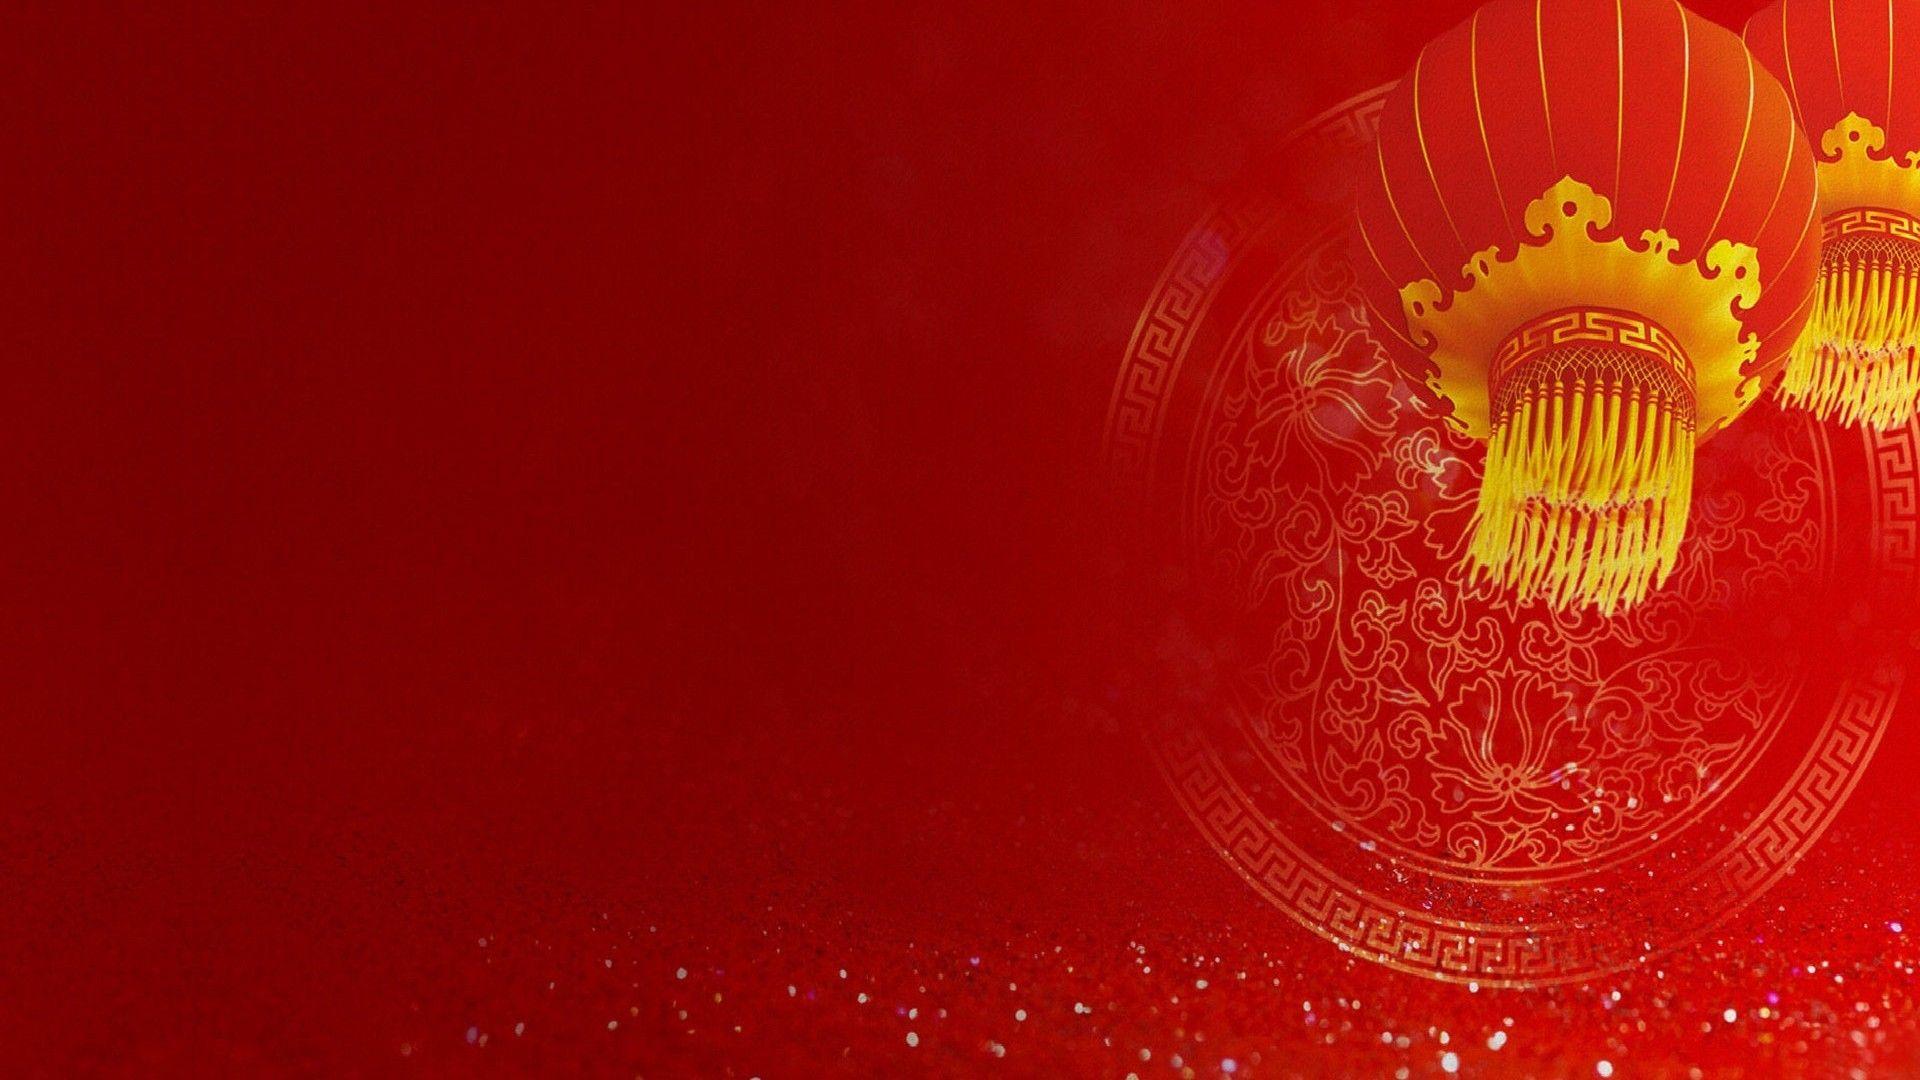 Chinese New Year Desktop Wallpapers Top Free Chinese New Year Desktop